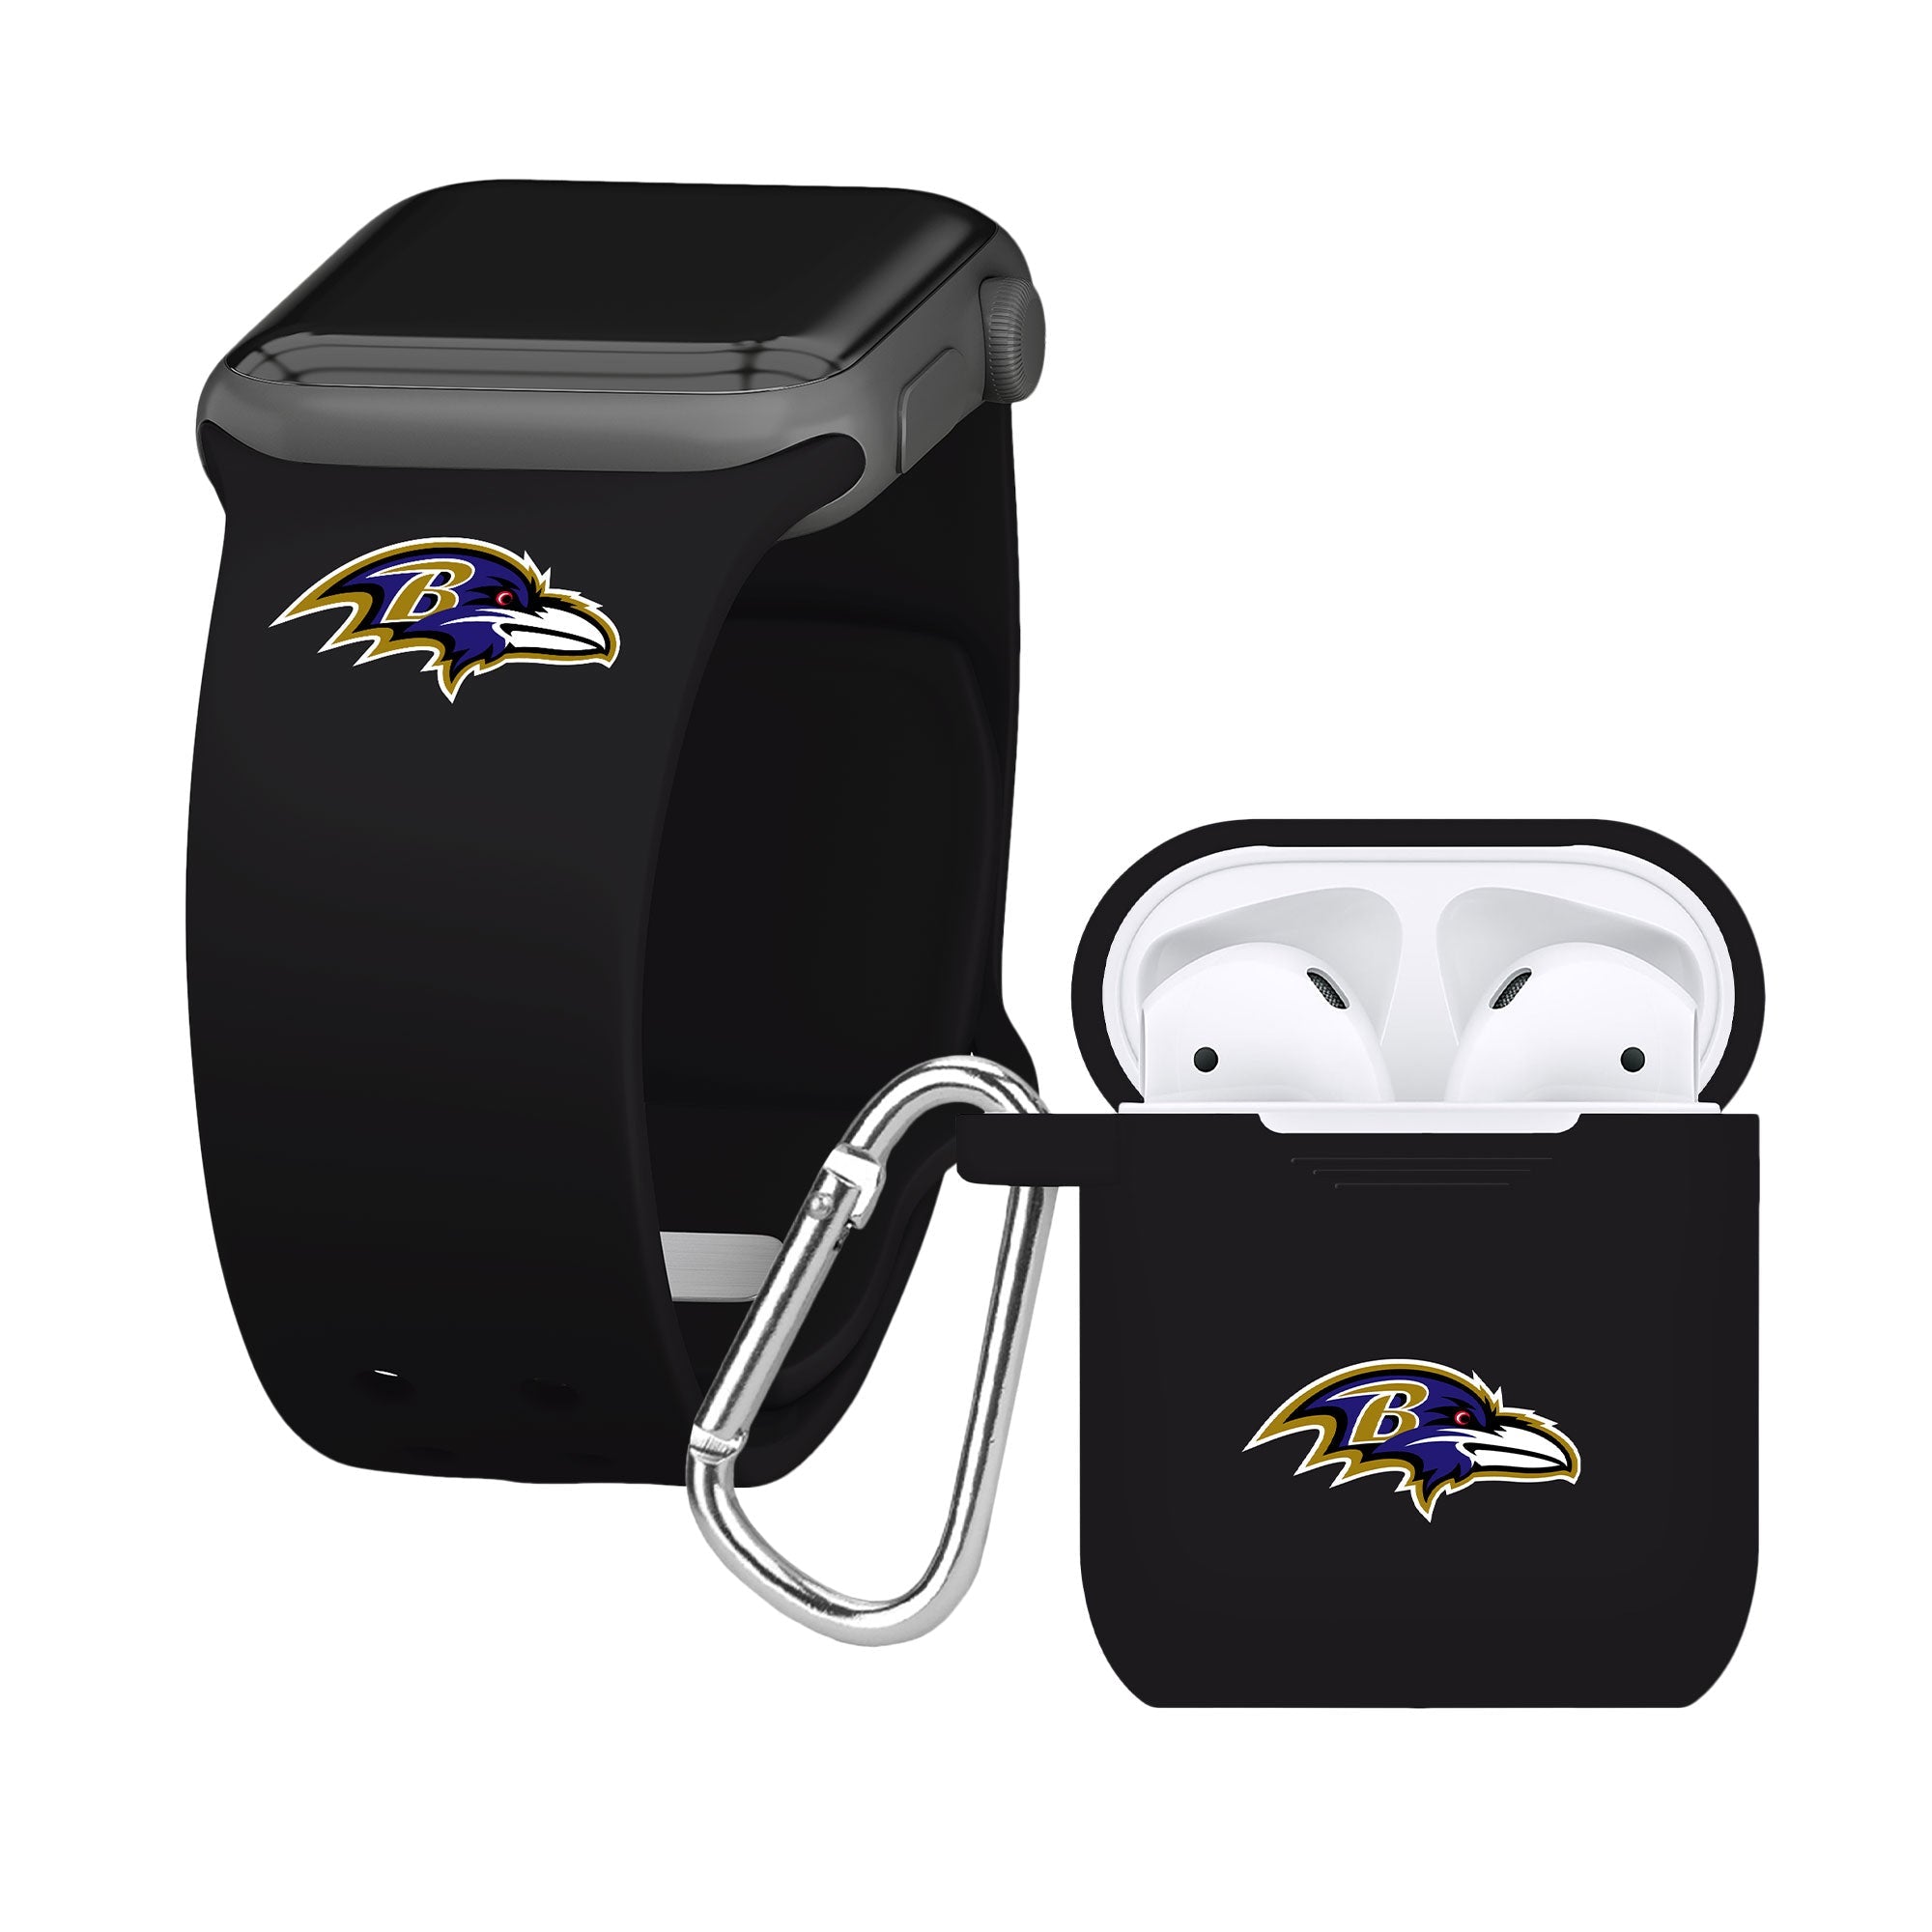 Game Time Baltimore Ravens Apple Combo Package